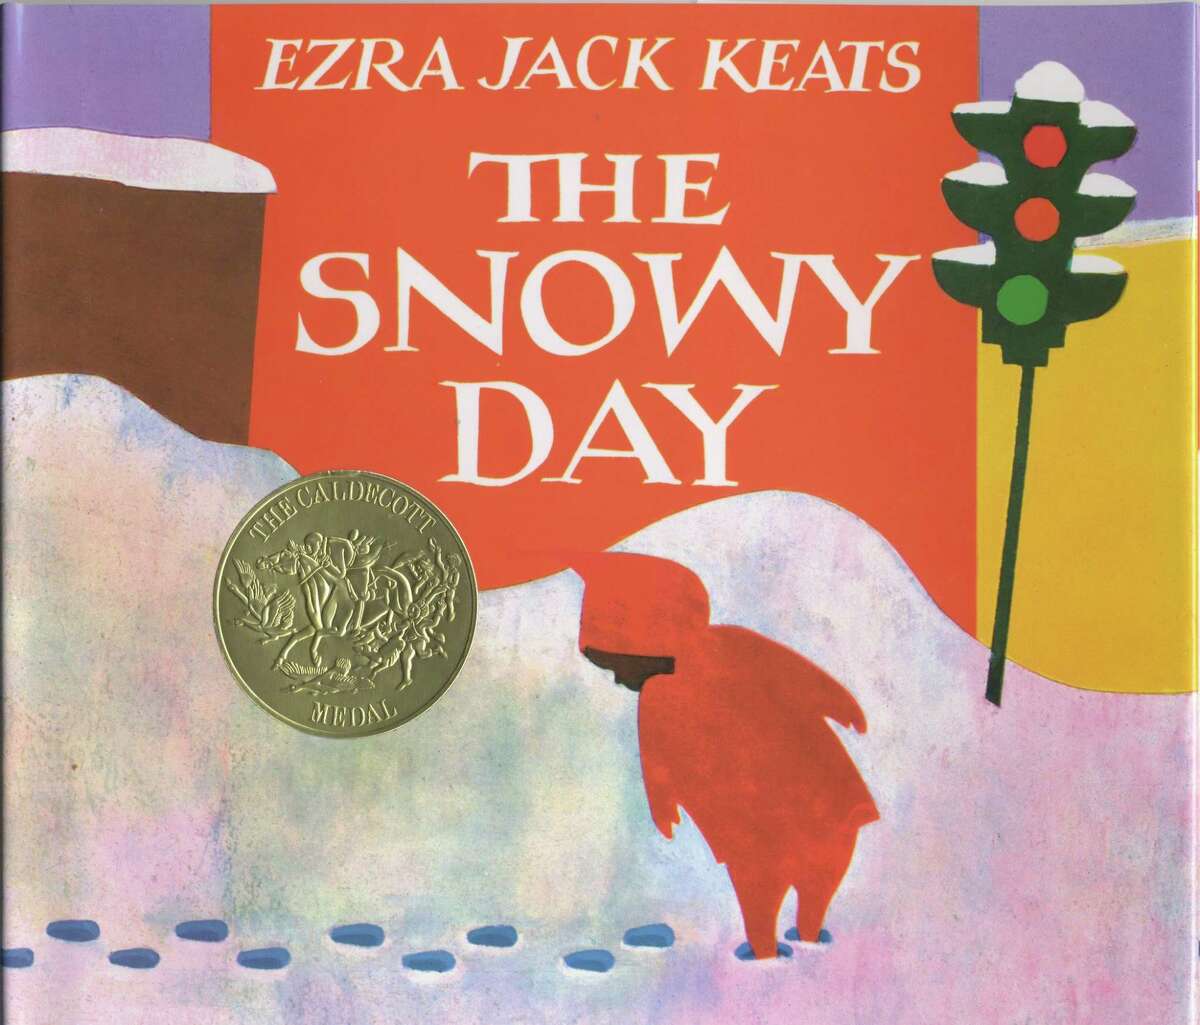 Published 50 years ago, in 1962, "The Snowy Day," by Ezra Jack Keats was the first full-color picture book to feature a black protagonist.